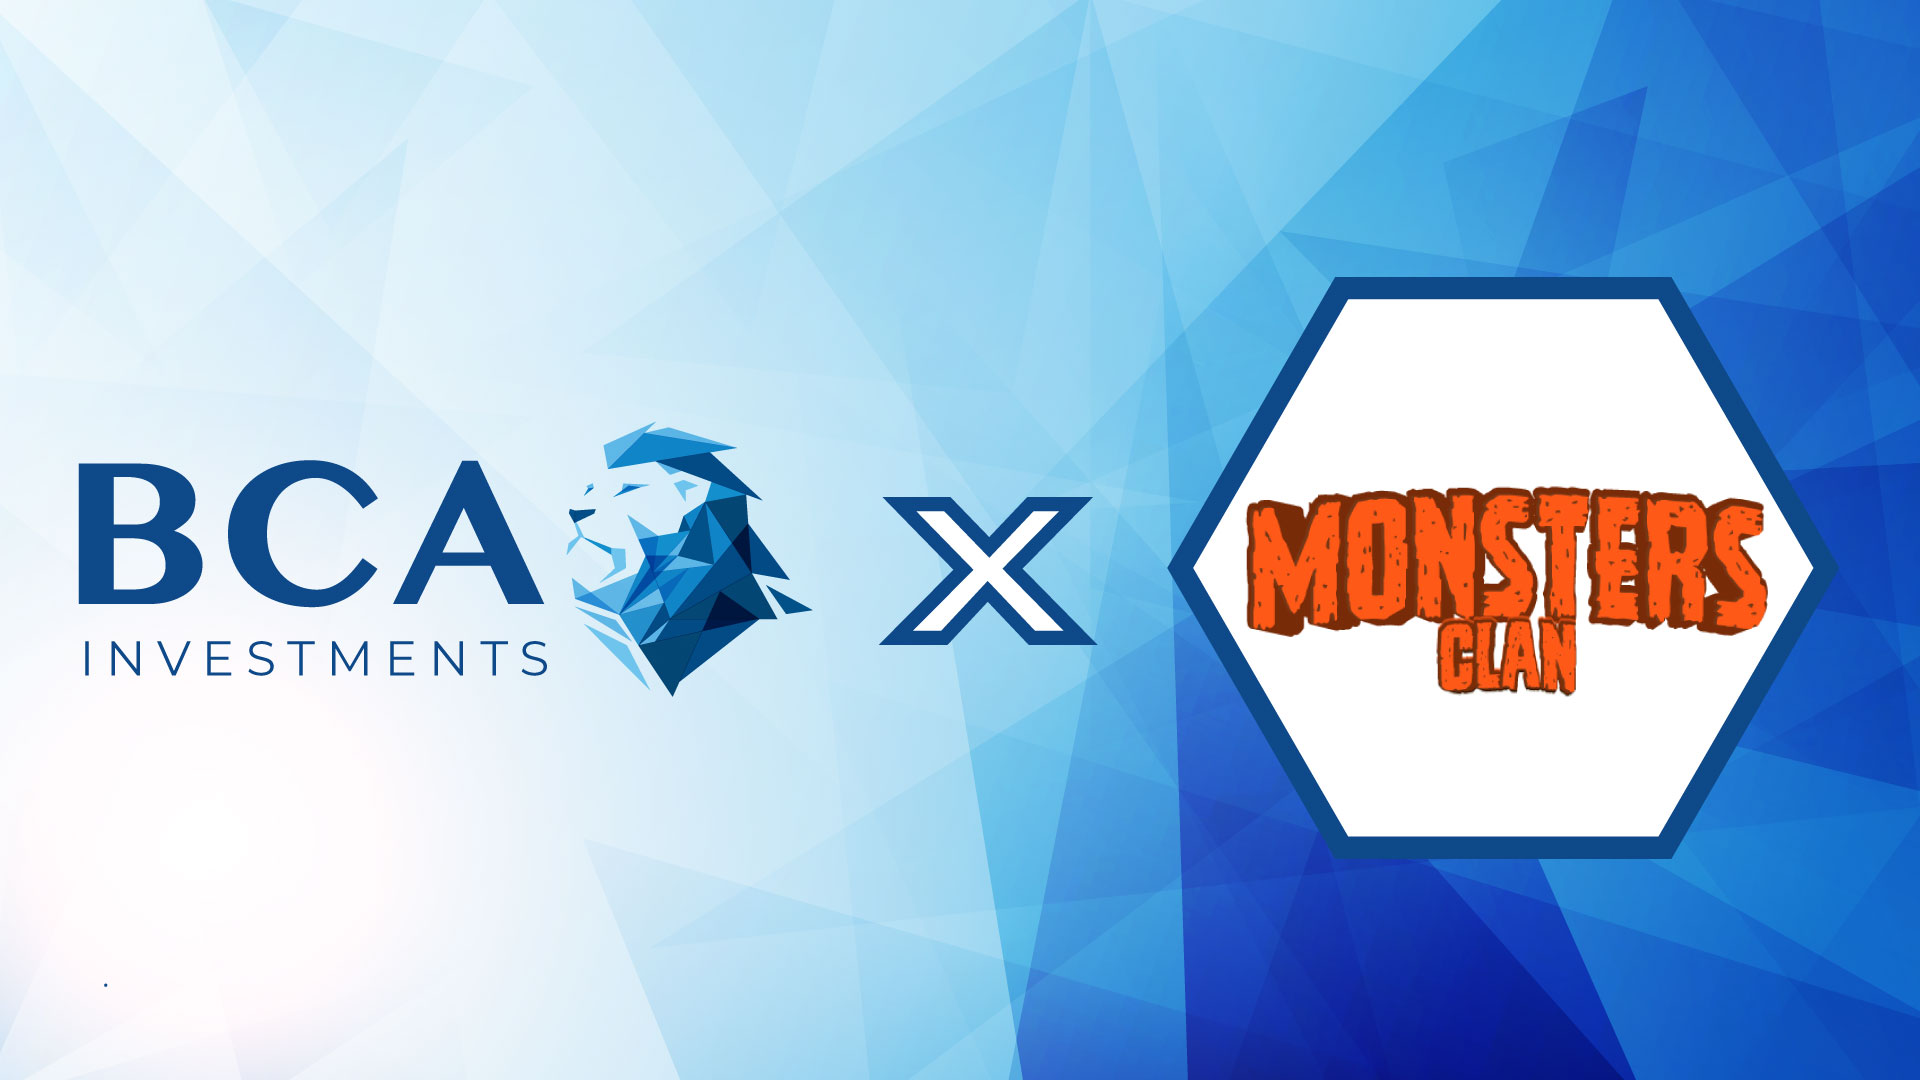 Partnership: Monsters Clan x BCA investments